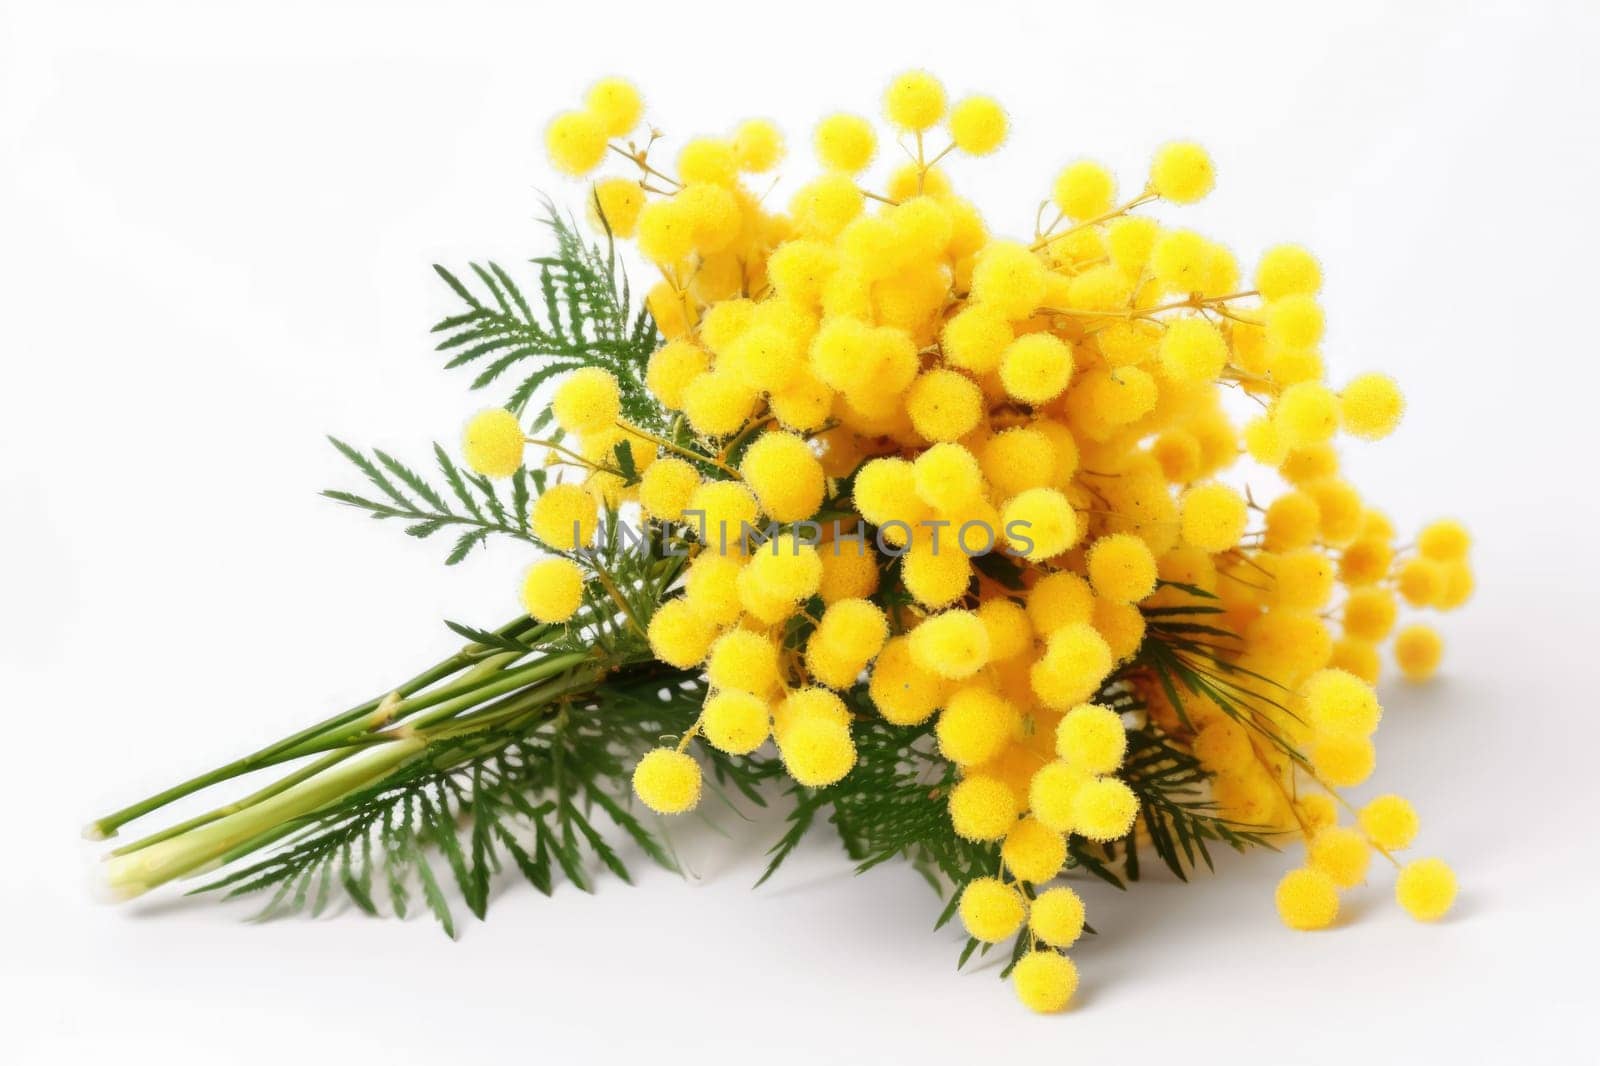 Bouquet of mimosa on a white background